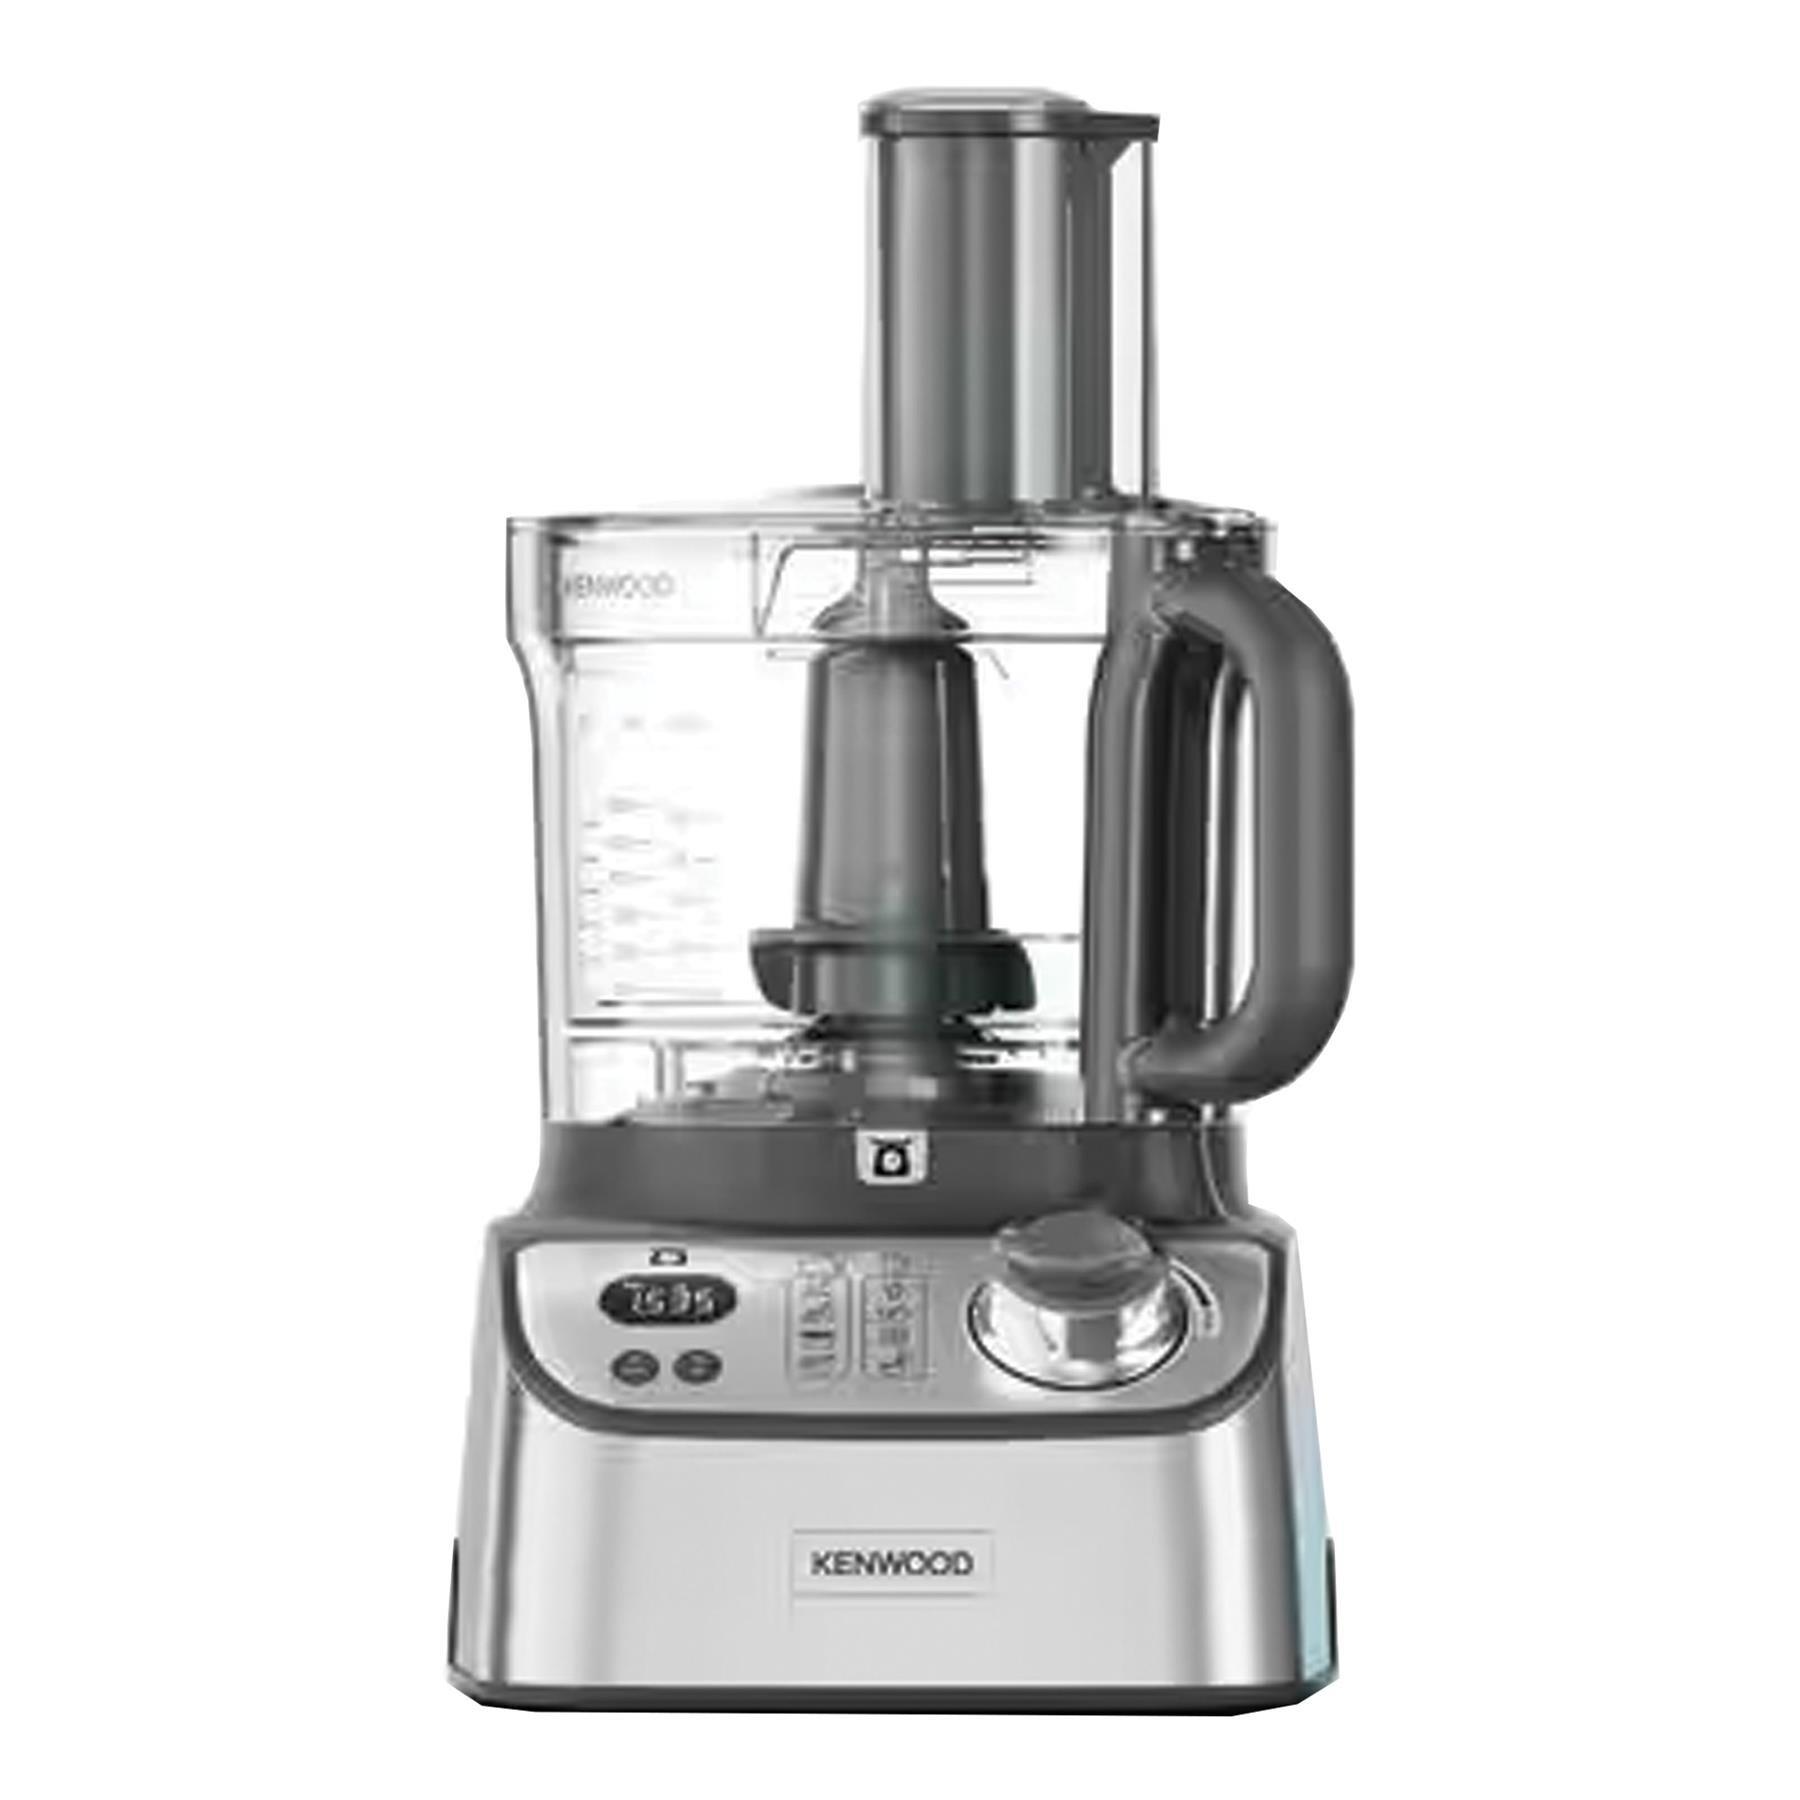 MultiPro Express Weigh+ 7-in-1  Food Processor